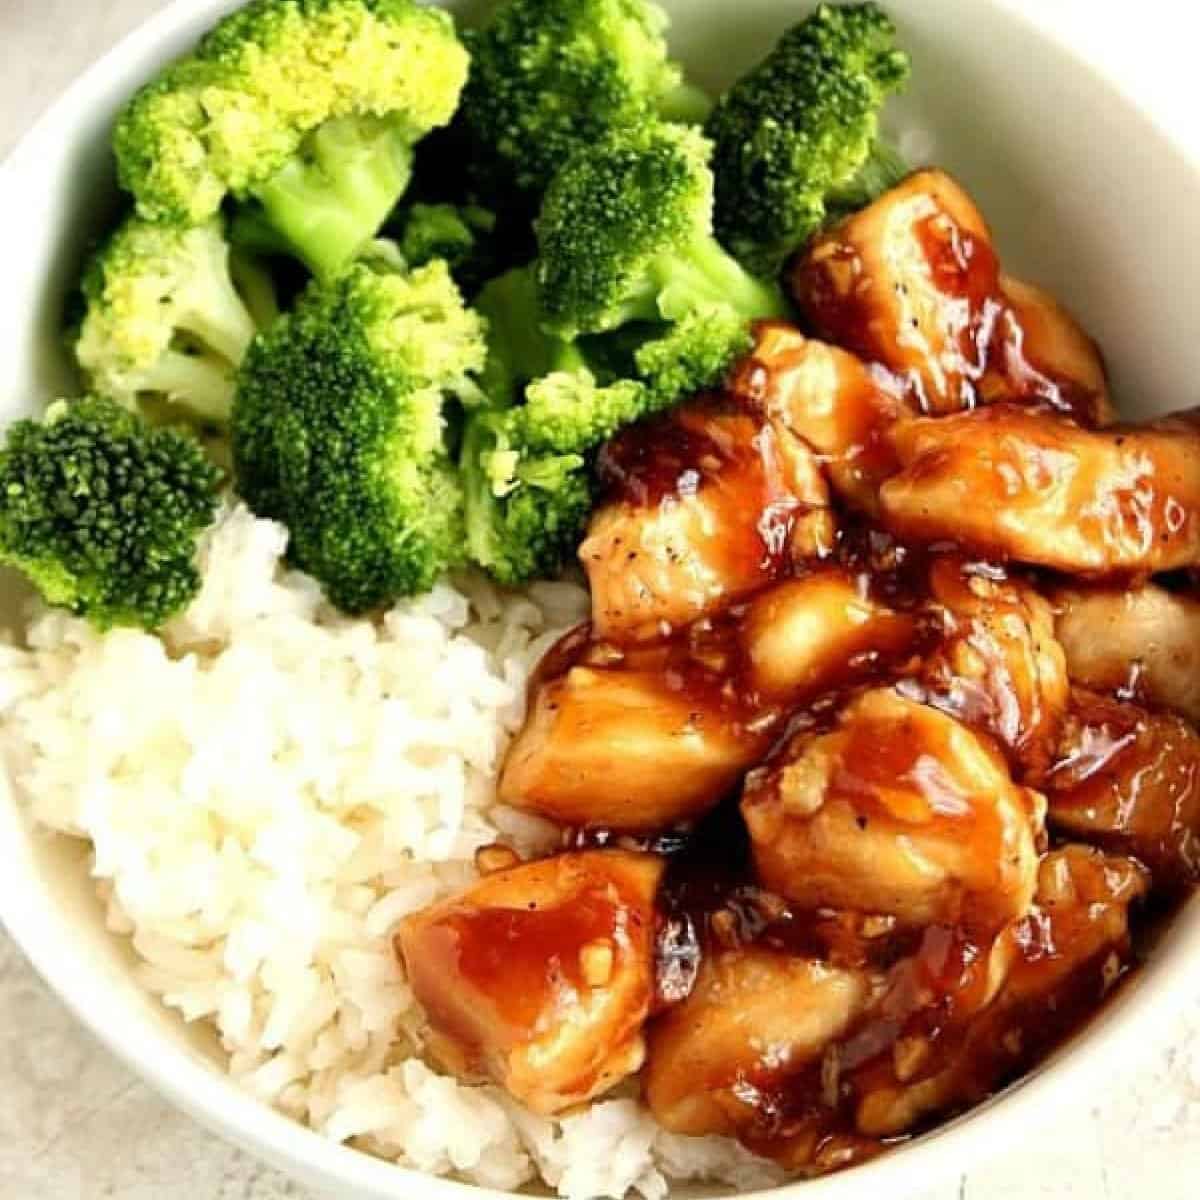 Square image of chicken in teriyaki sauce, rice and broccoli in a white bowl.